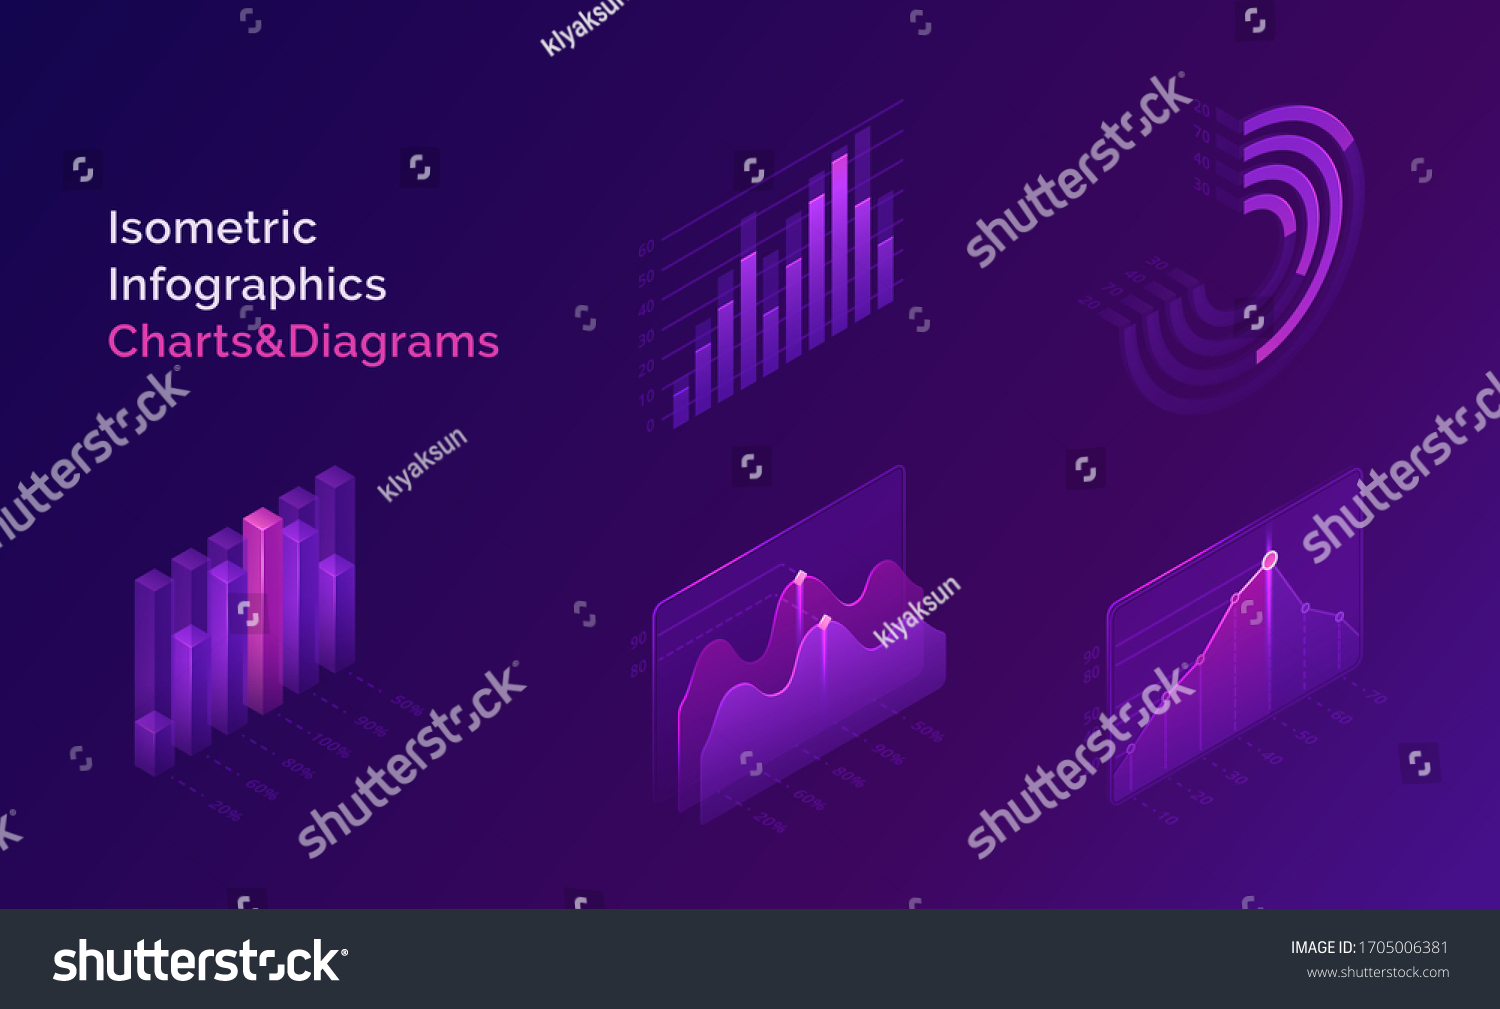 SVG of Isometric infographics charts and diagrams, 3d data analysis columns, infographic vector elements, financial information datum statistic. Template for business presentation, report or web site design svg